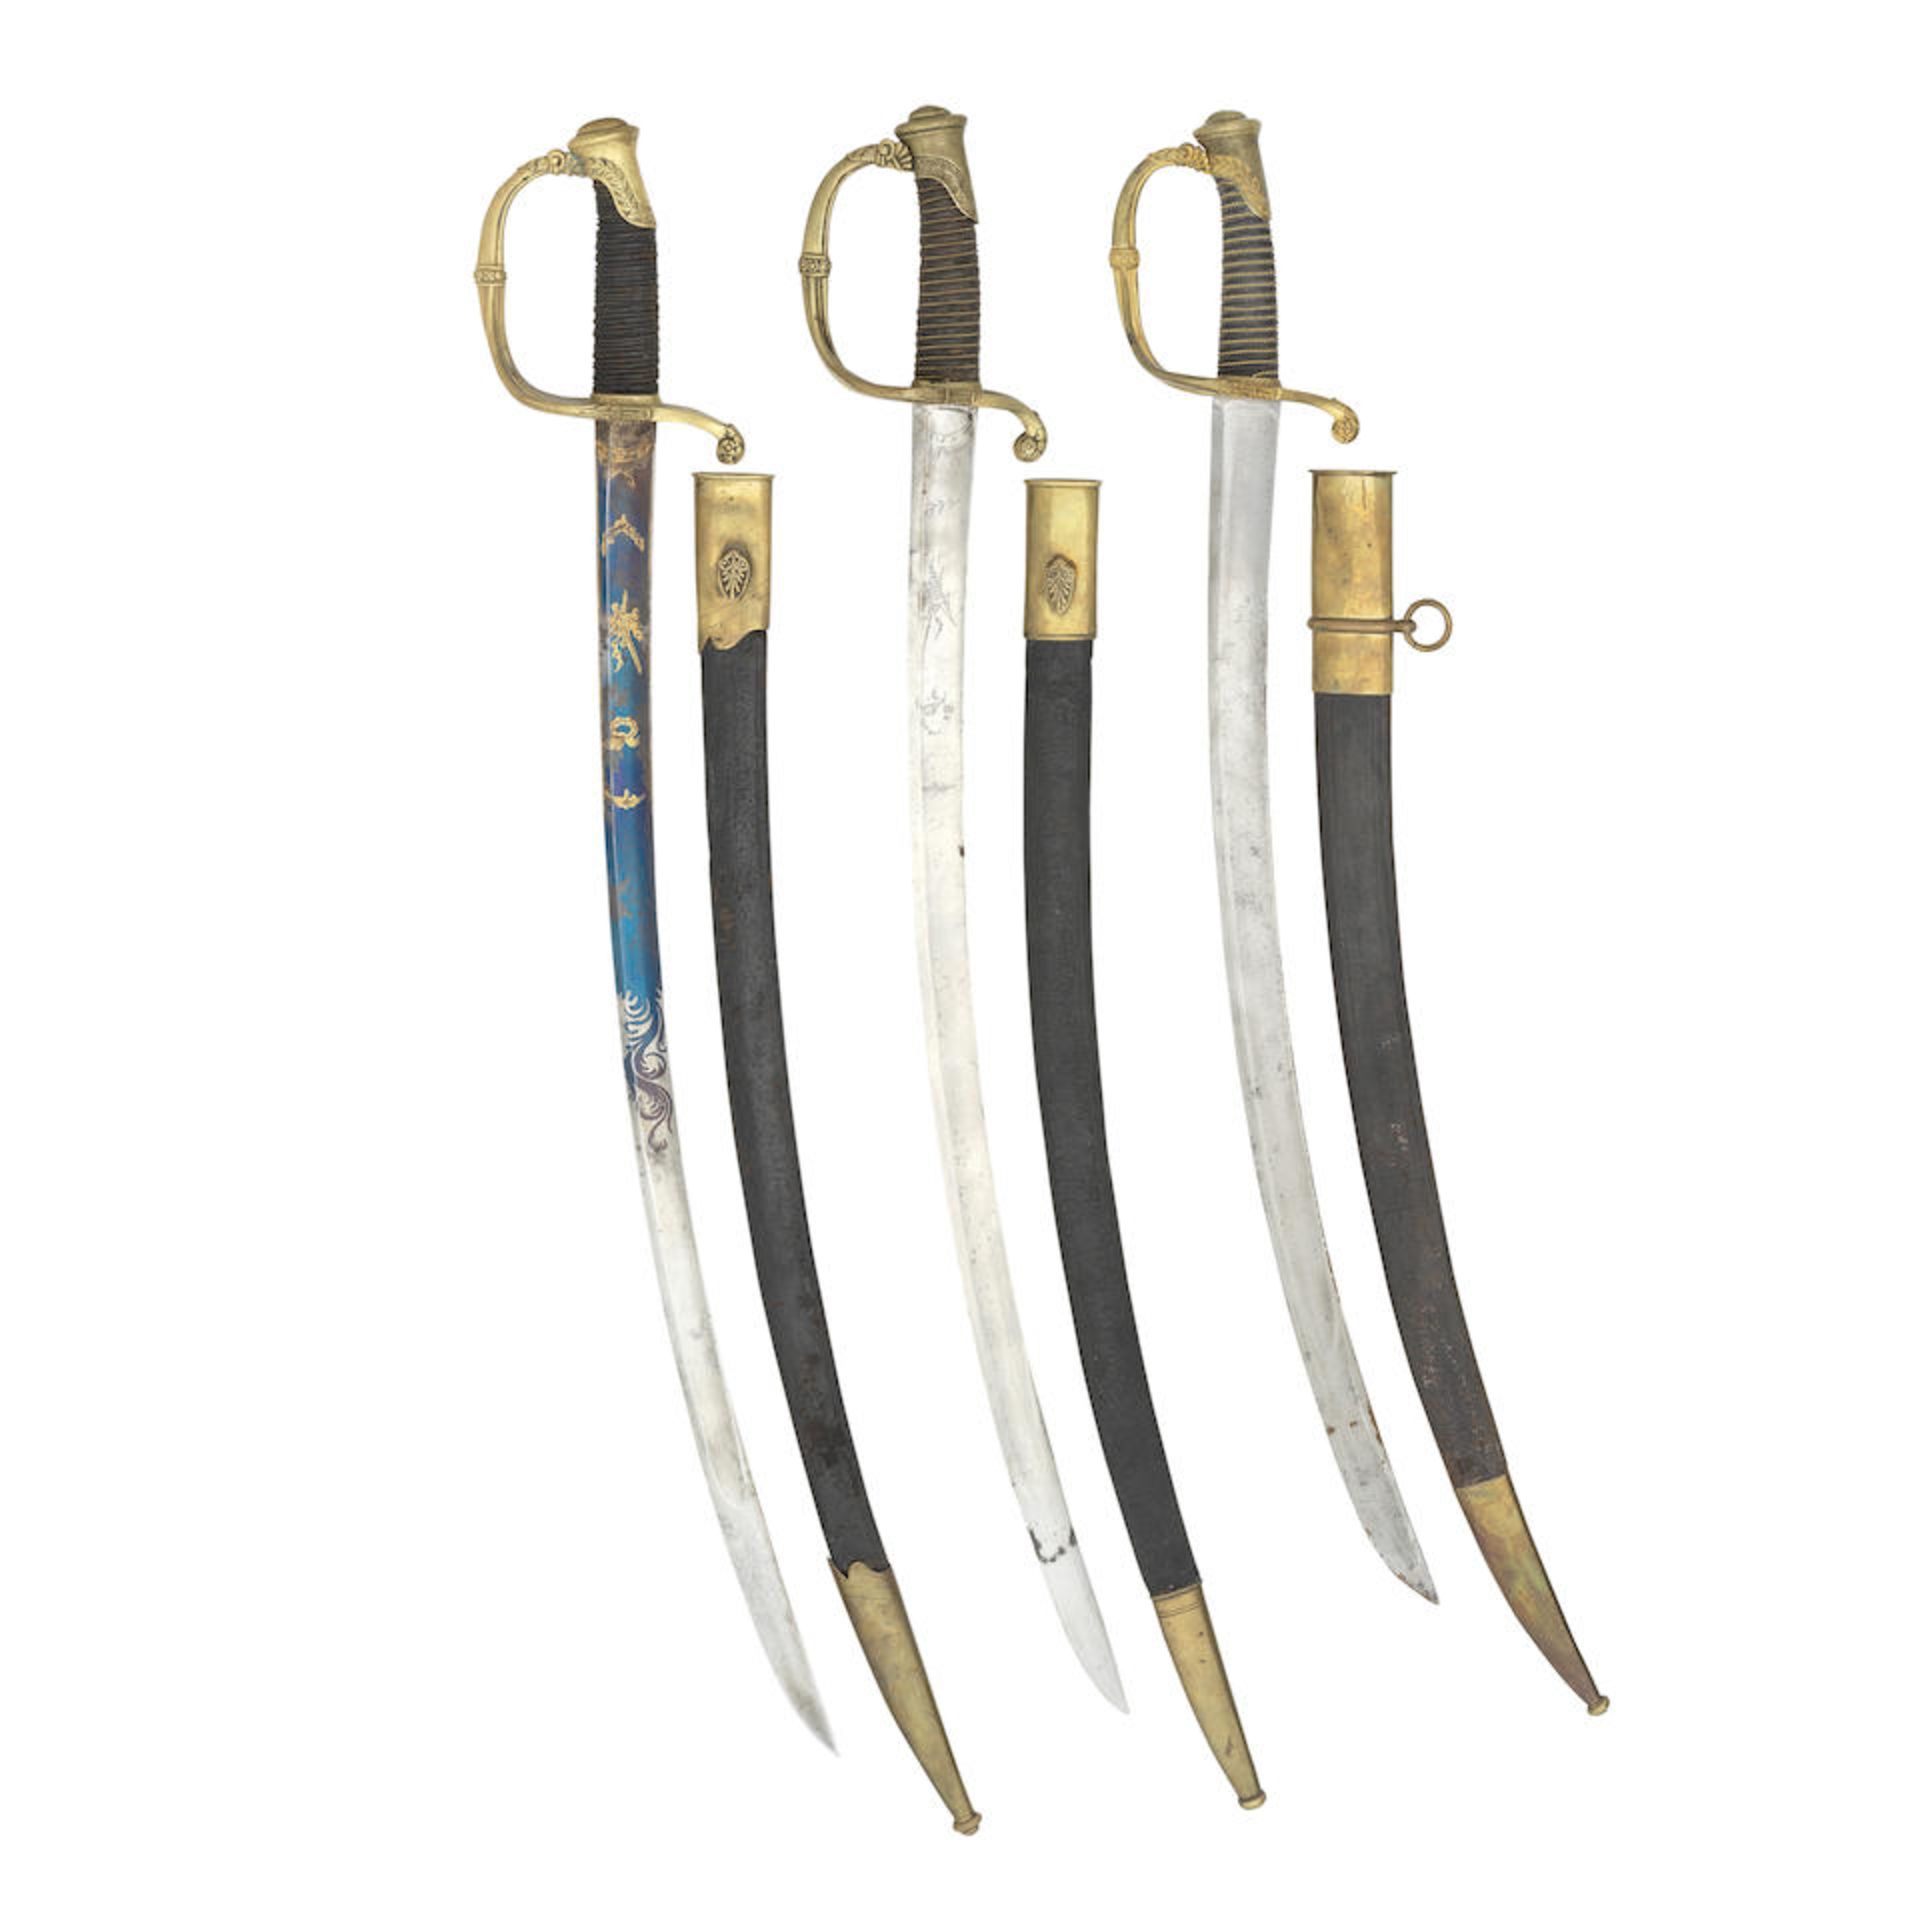 Three French 1821 Model Infantry Officer's Sabres